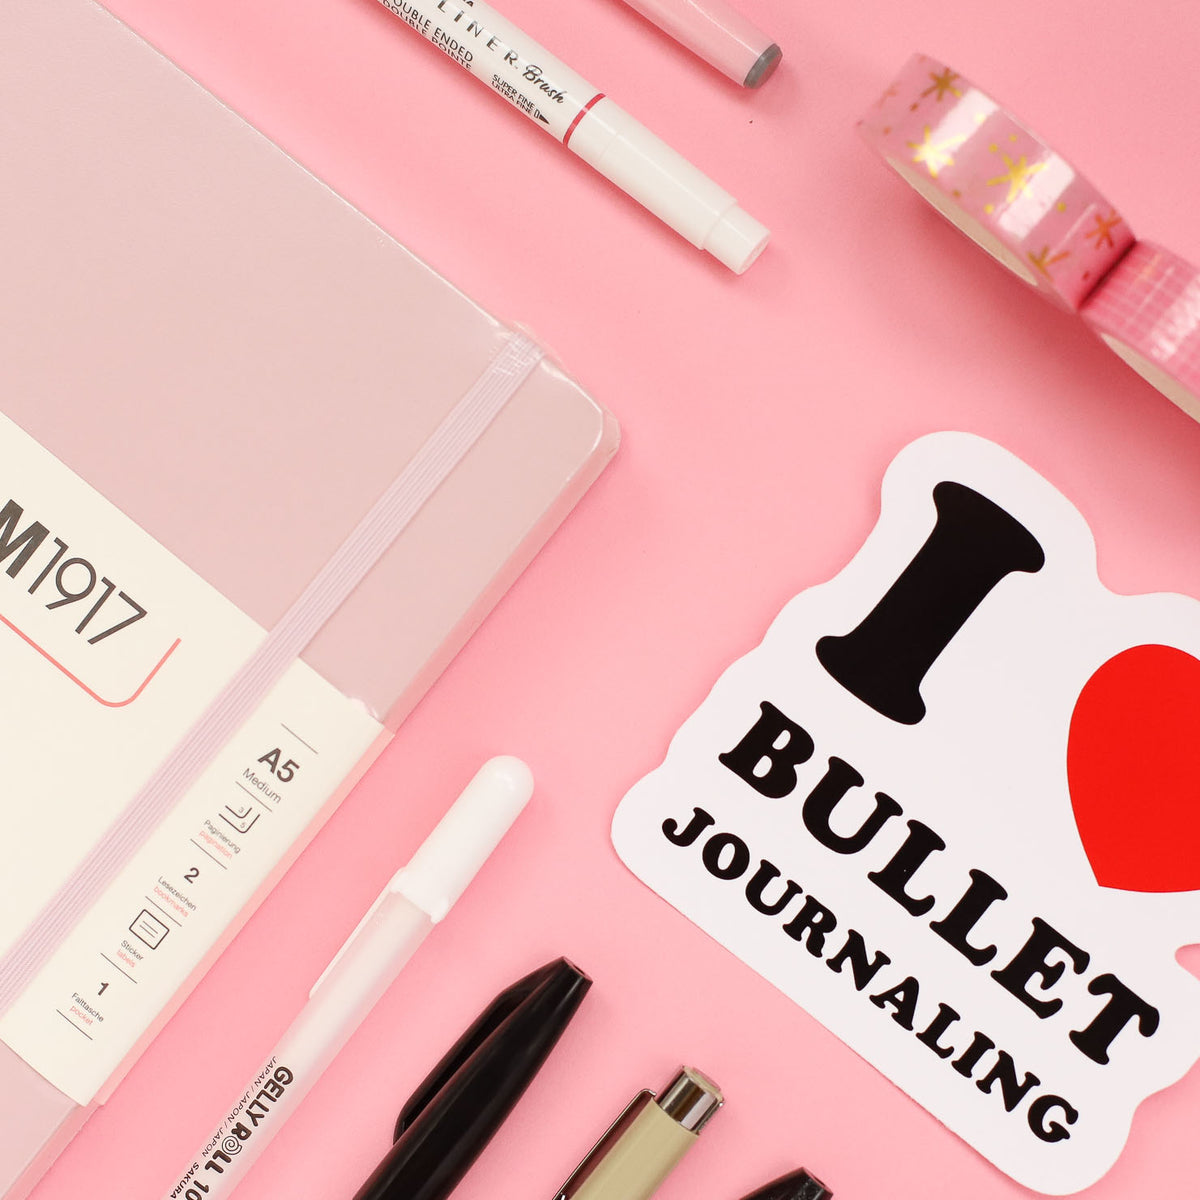 Best bullet journal supplies for beginners and how to get started